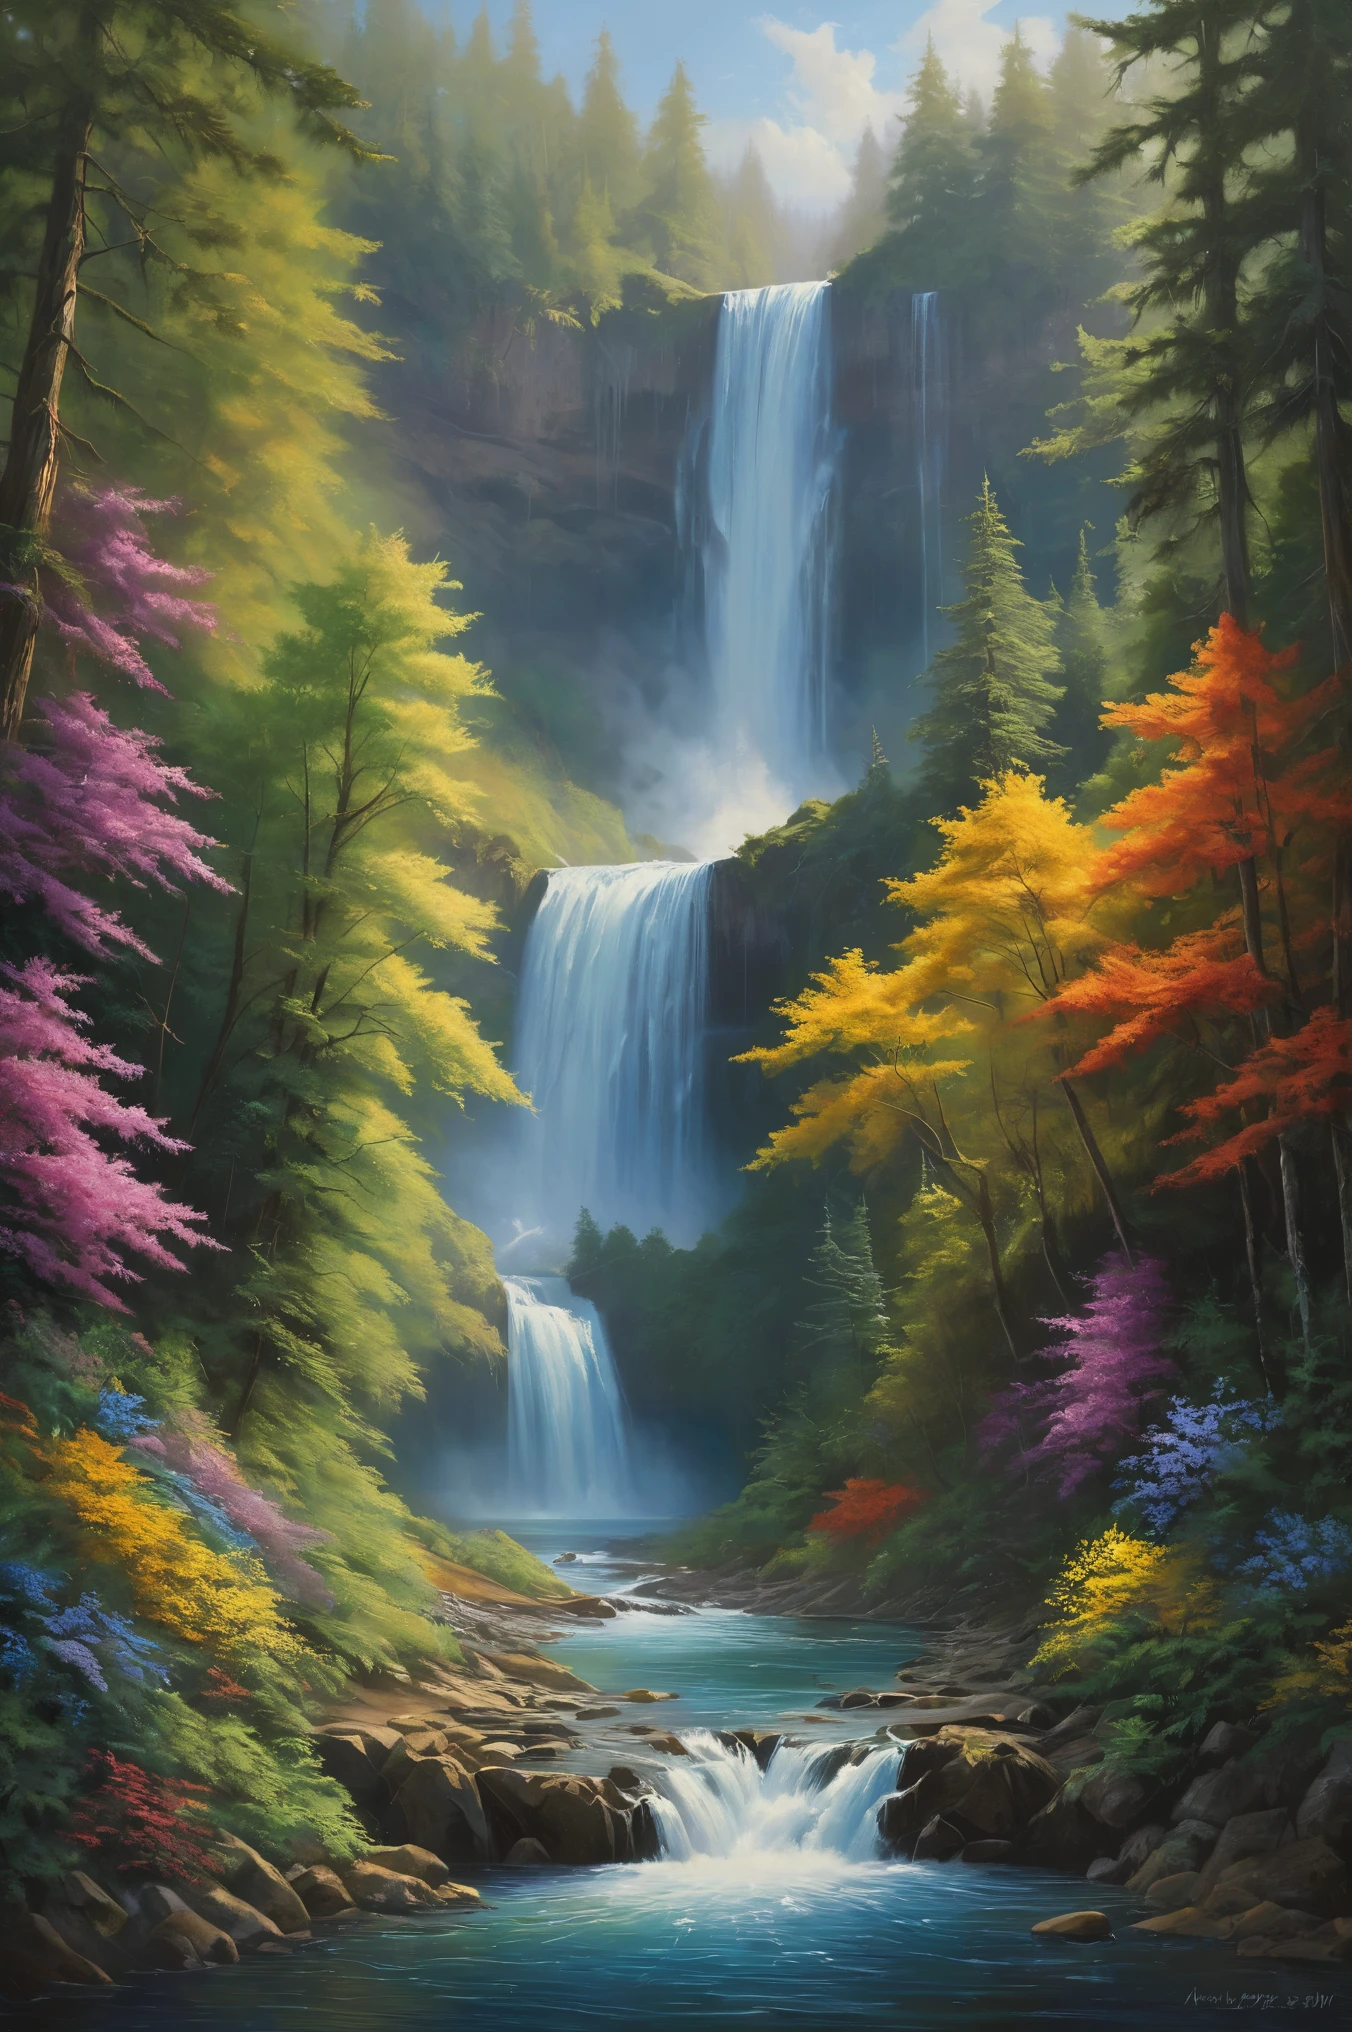 painting of a cachoeira in a forest with a river running through it, an endless cachoeira, multiple cachoeiras, cachoeiras, with trees and cachoeiras, floating cachoeiras, (cachoeira), with cachoeiras, por Michael James Smith, em cascata cachoeiras, flowers and cachoeiras, em cascata iridescent cachoeiras, cachoeira, several cachoeiras, high cachoeiras, em cascata, forest and cachoeira